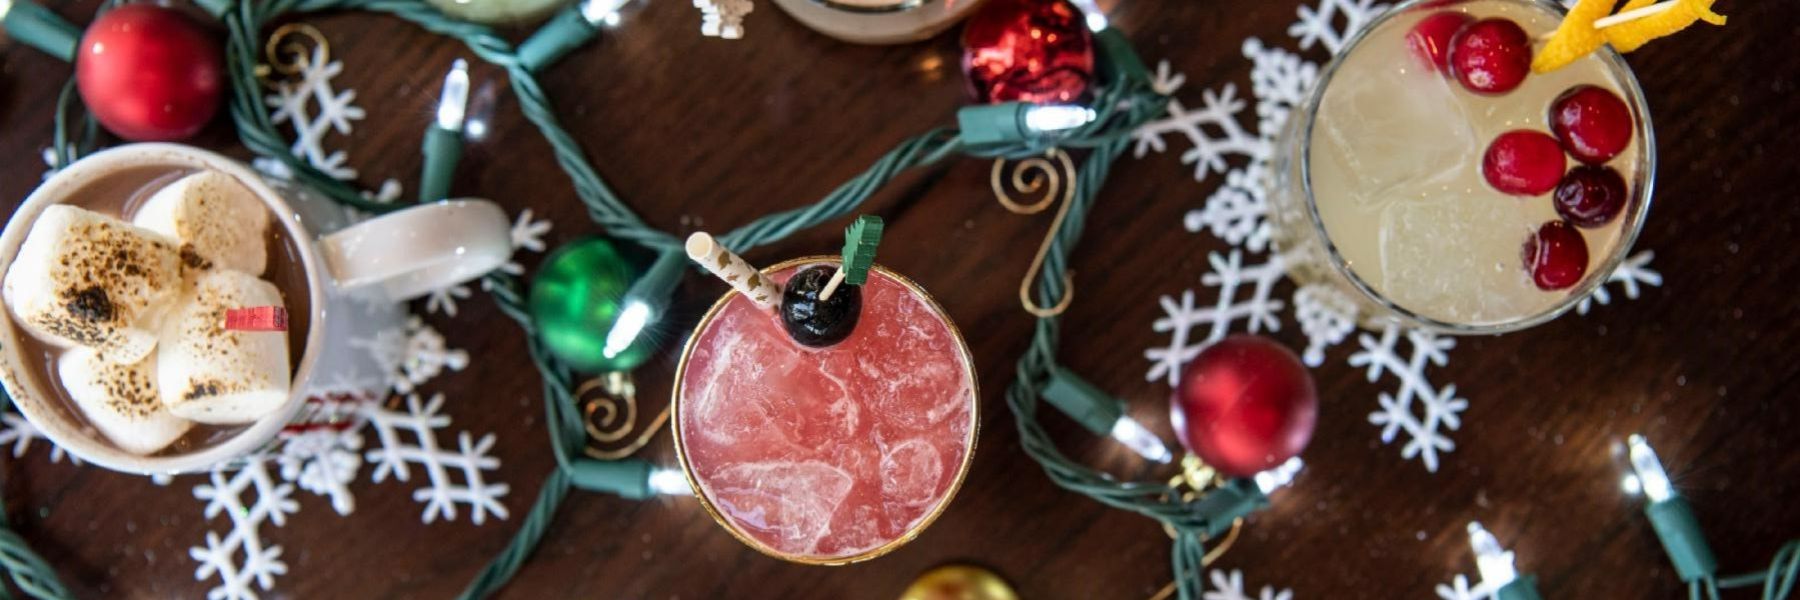 The Sleigh Shed at St. Louis Union Station offers creative holiday cocktails in a festive setting.